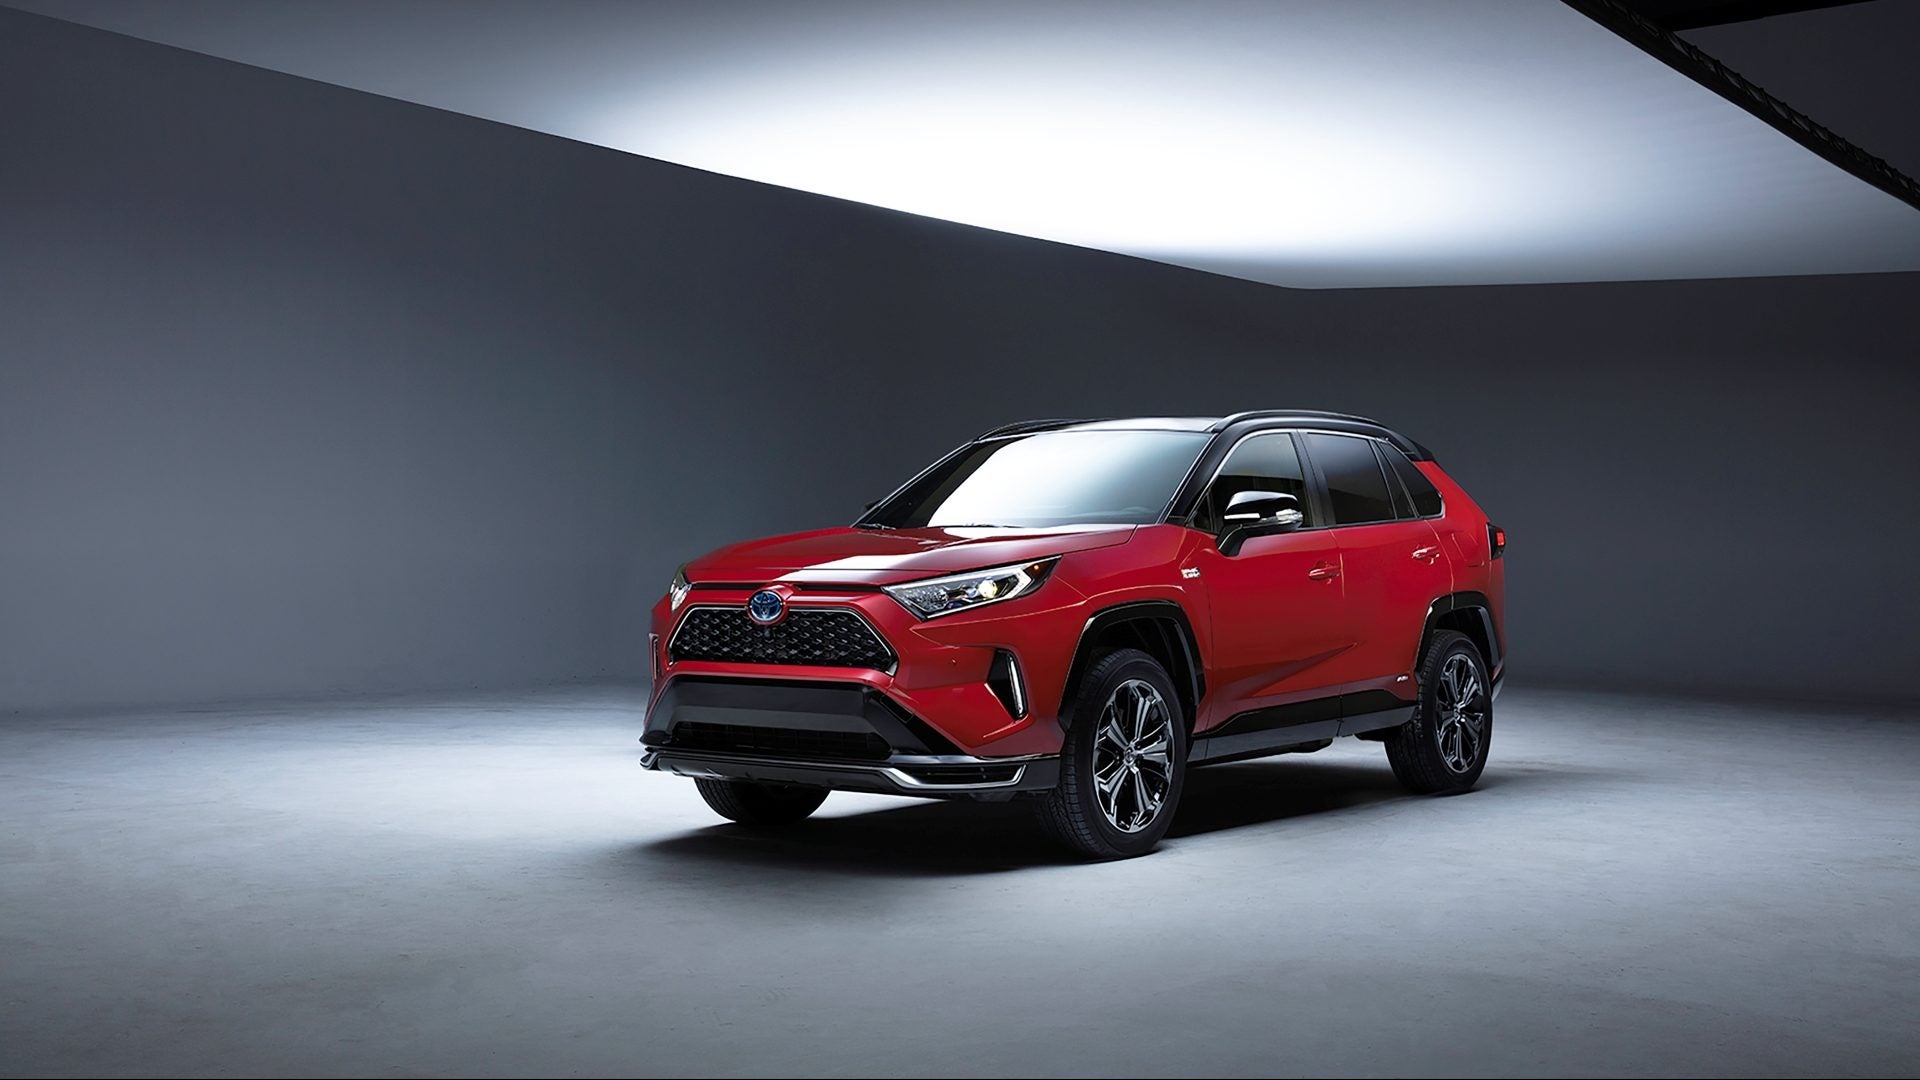 Toyota Going ‘All-In’ On Plug-In Hybrids, Starting with the 2021 Toyota RAV4 PHEV